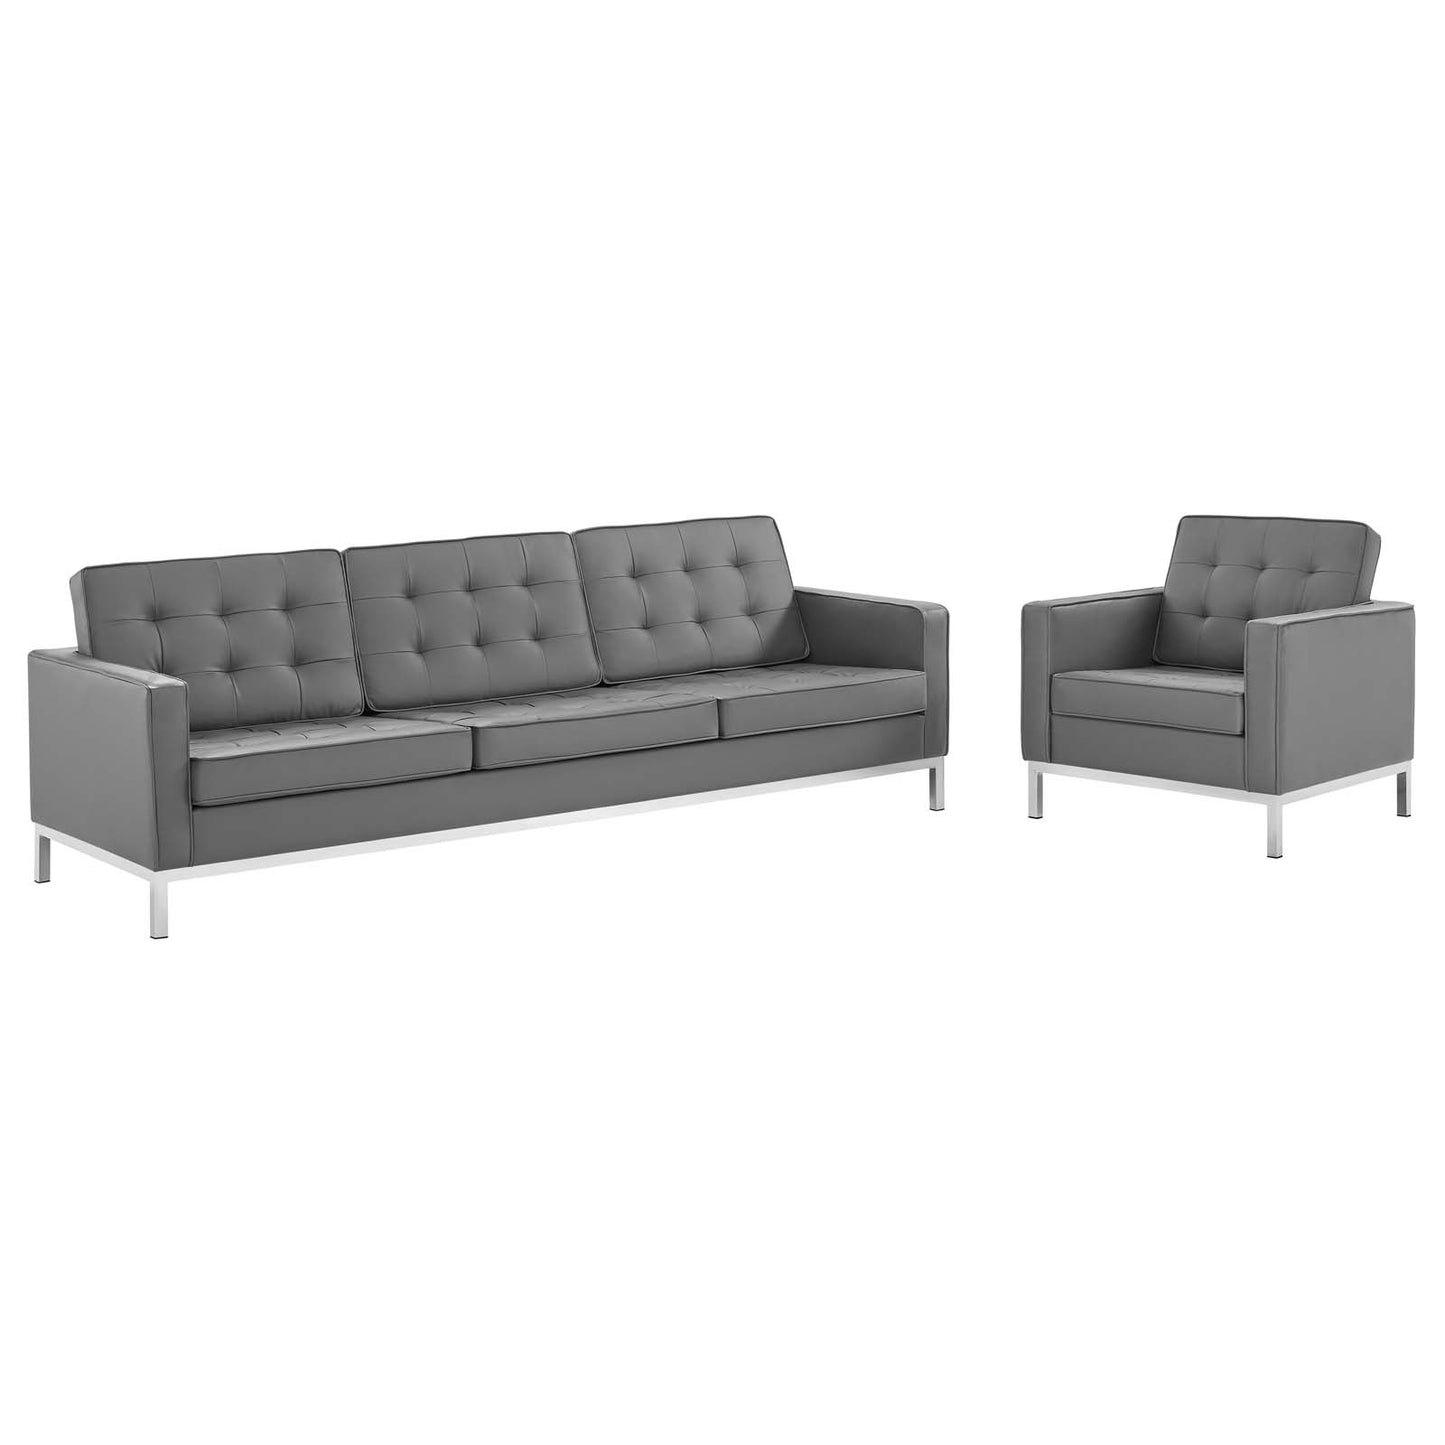 Loft Tufted Upholstered Faux Leather Sofa and Armchair Set Silver Gray EEI-4104-SLV-GRY-SET